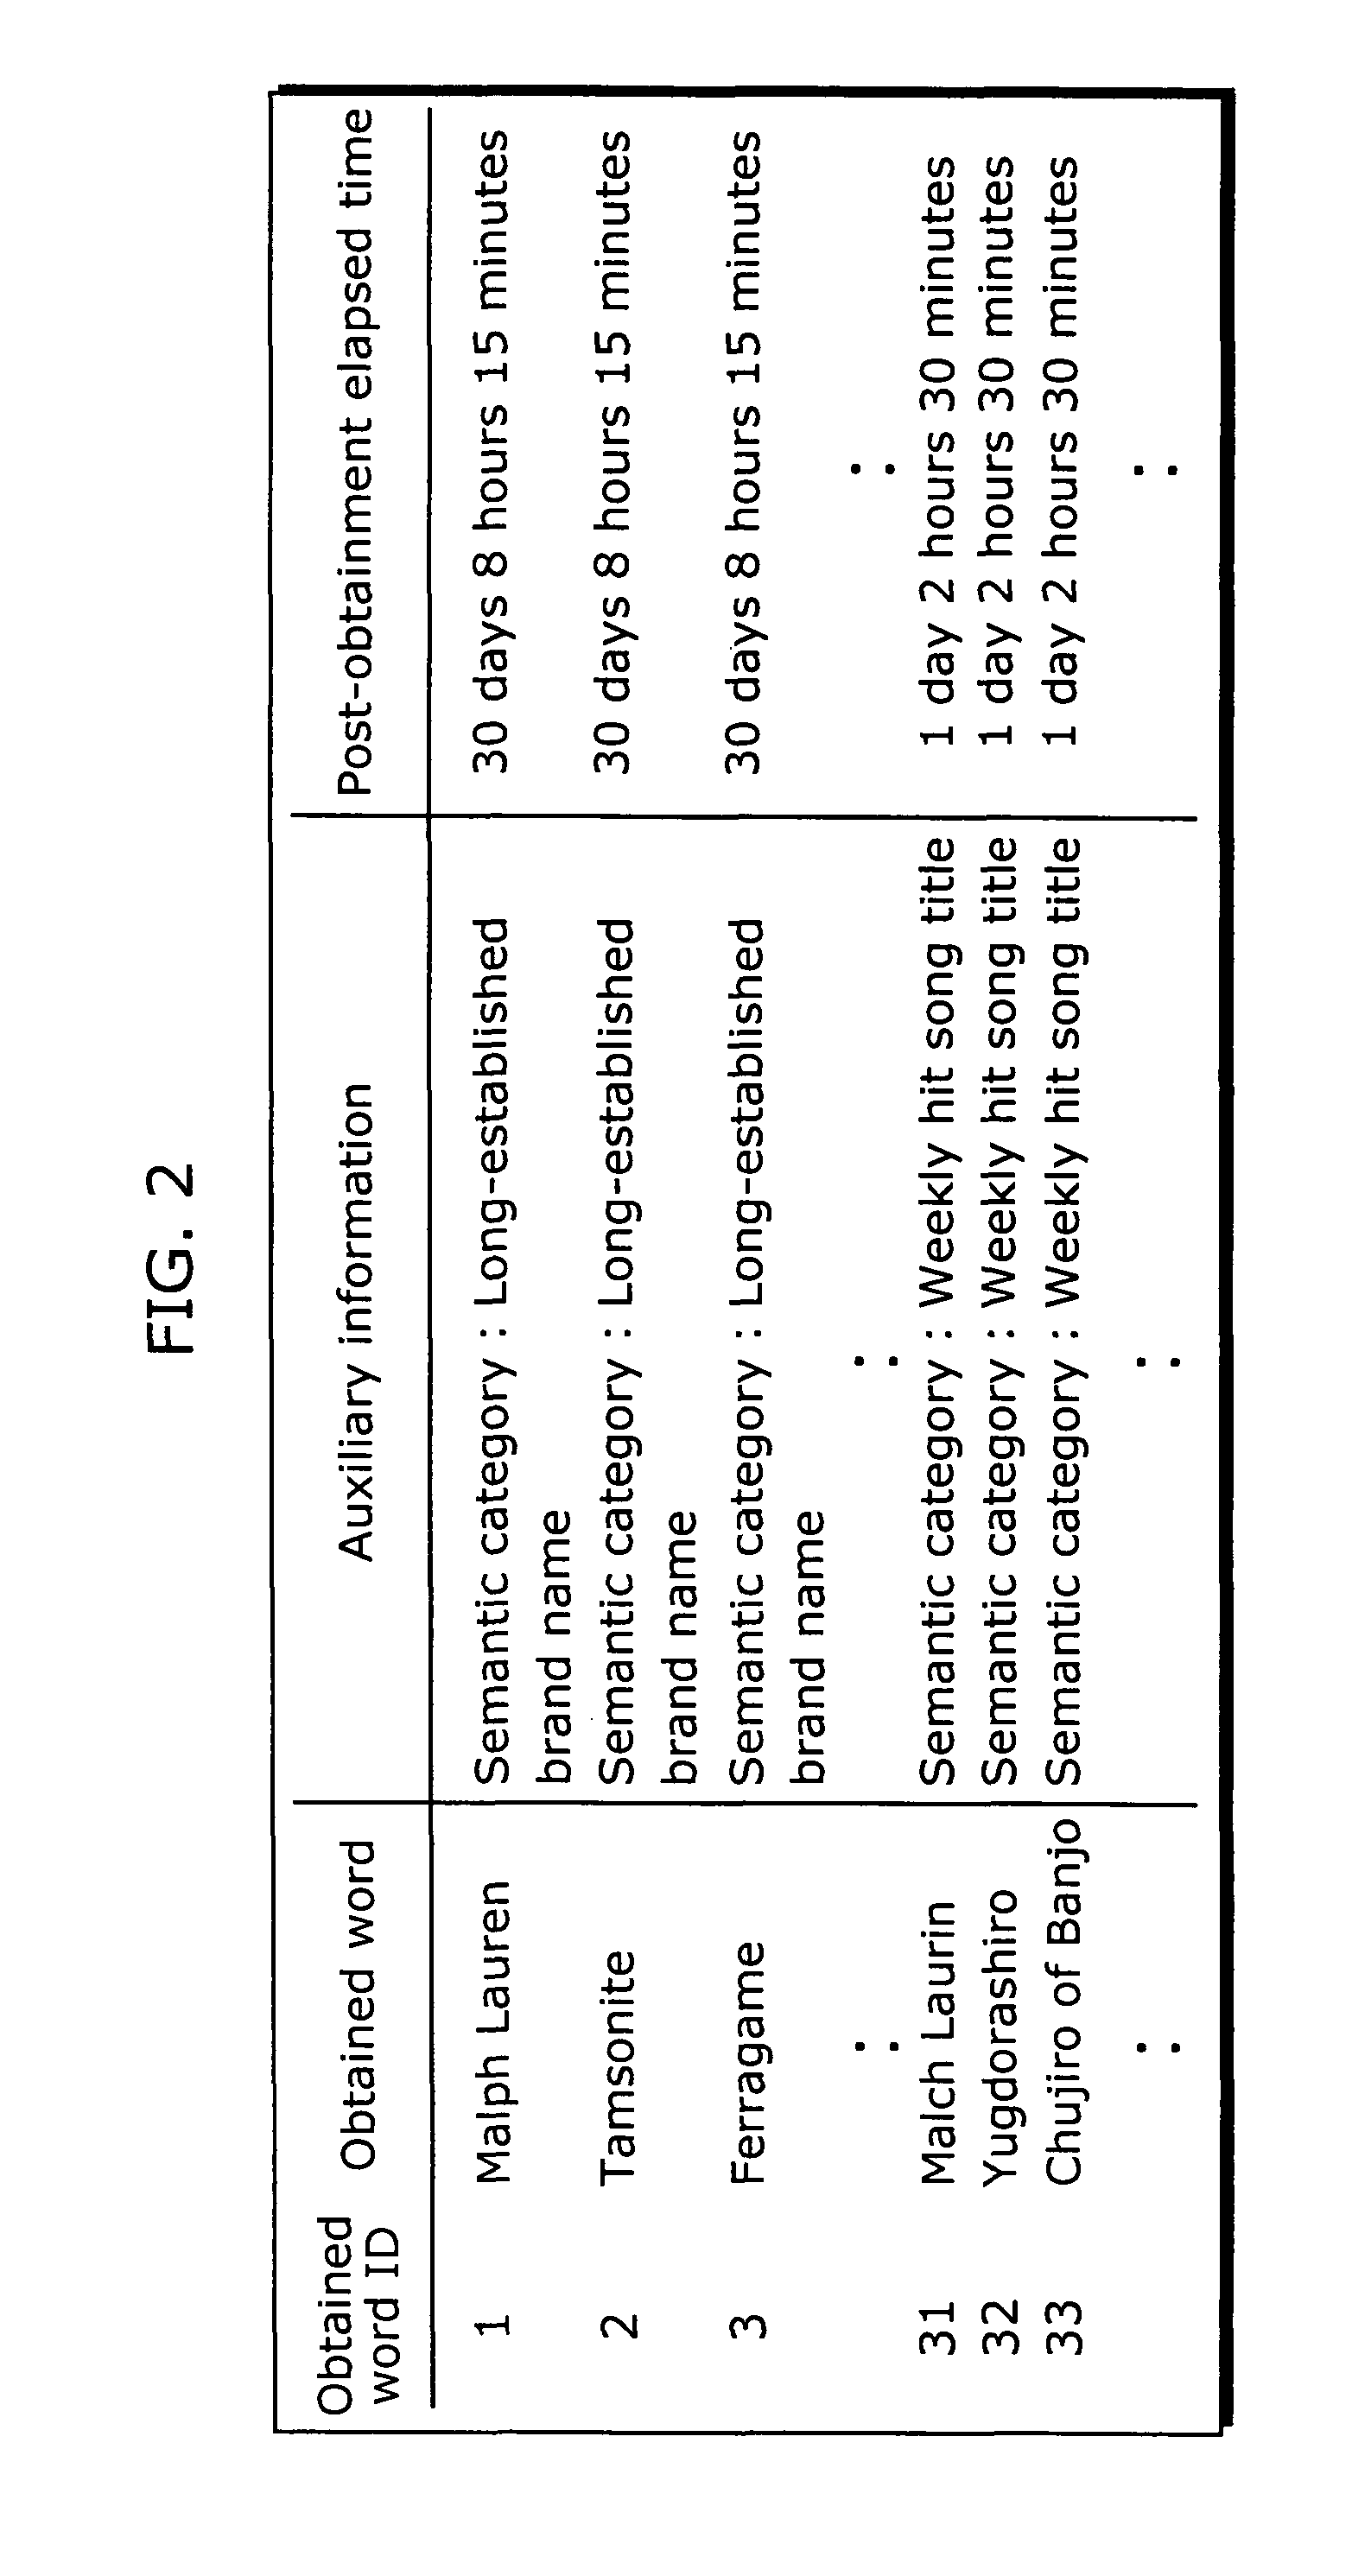 Speech recognition device and method of recognizing speech using a language model